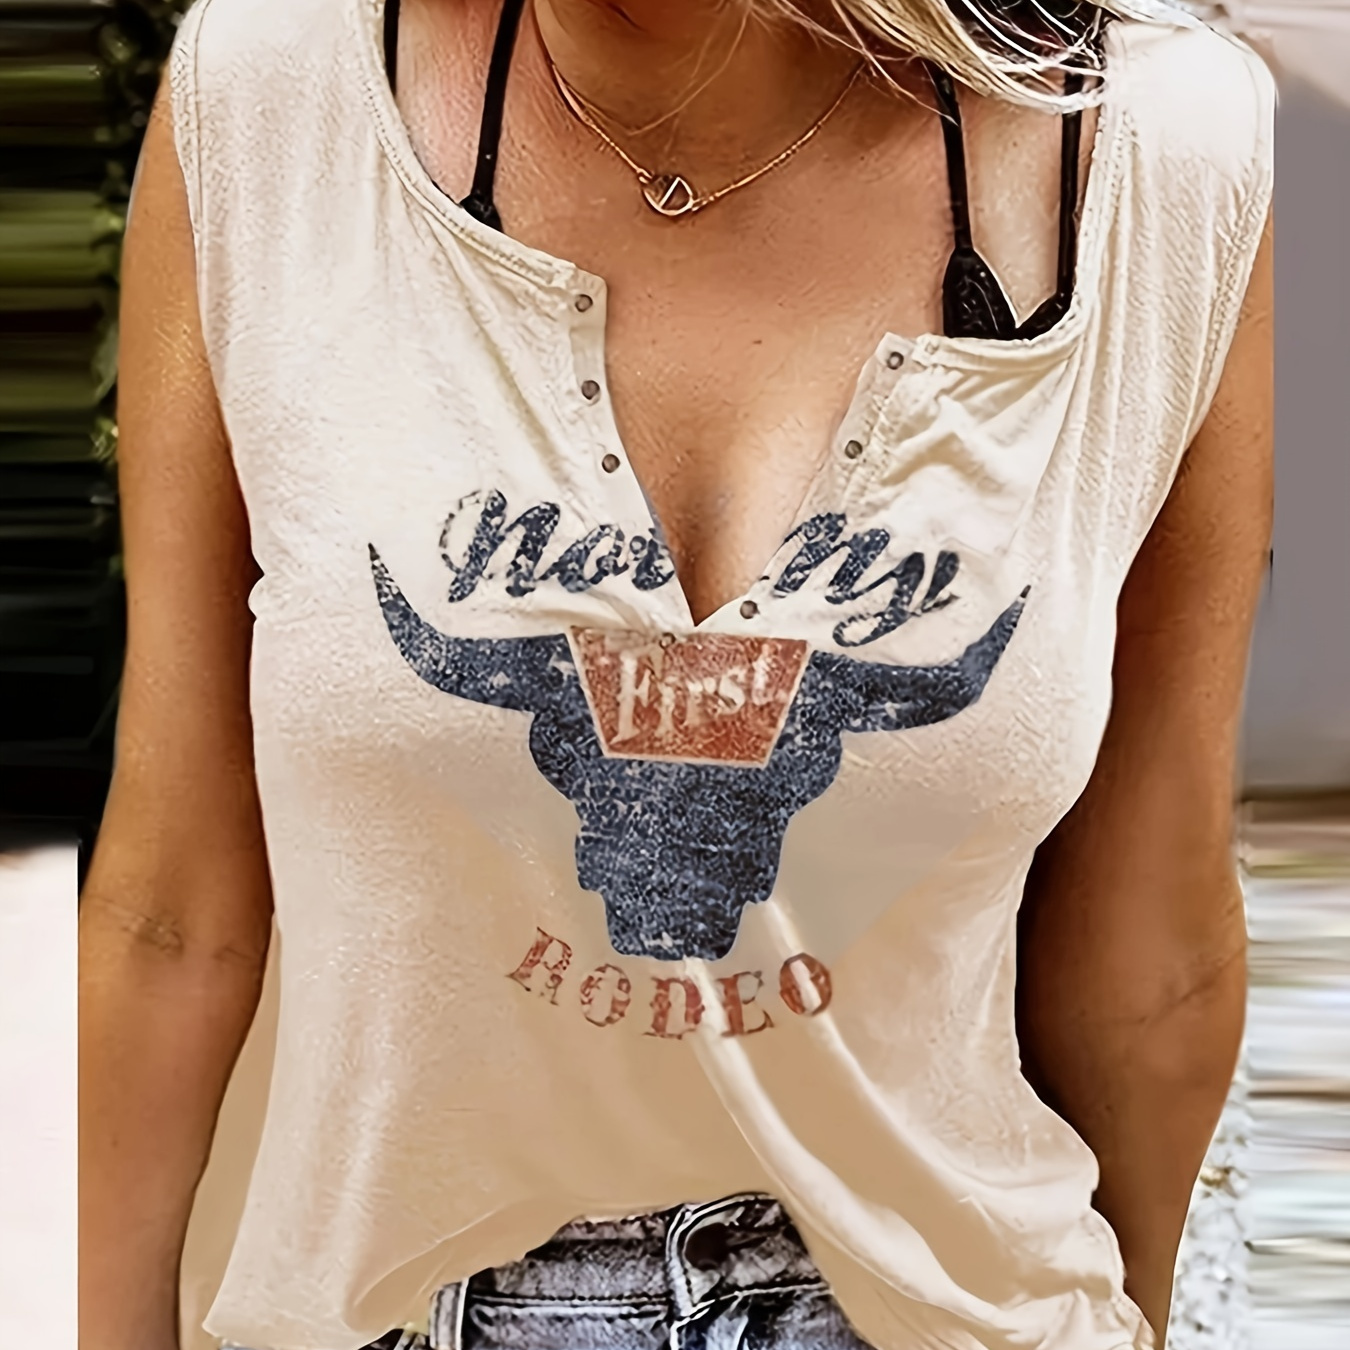 

Highland Cattle & Letter Print Tank Top, Casual Sleeveless Tank Top For Summer, Women's Clothing